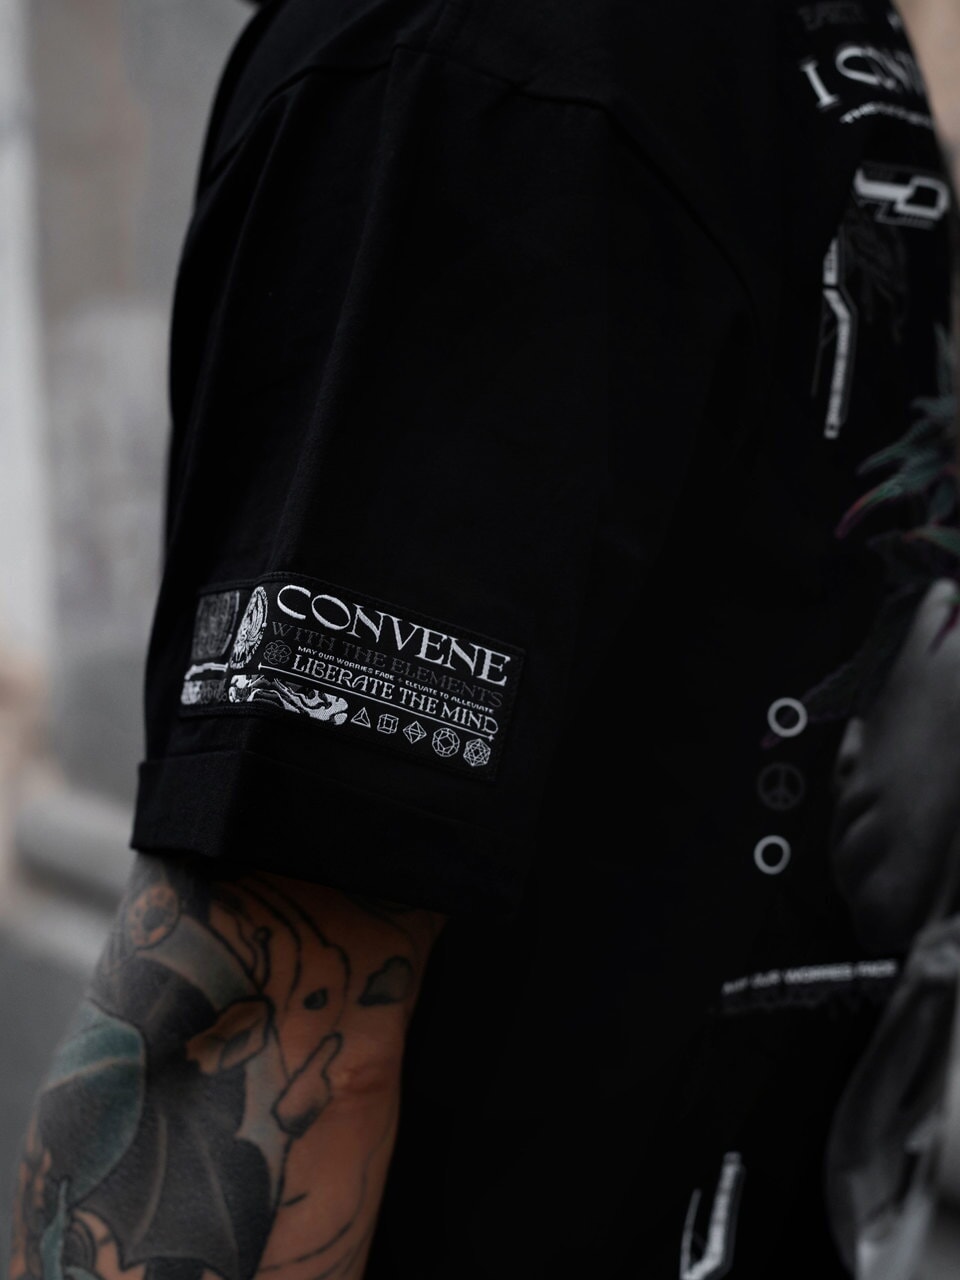 NEW RELEASE ✦ CONVENE WITH THE ELEMENTS ✦ Premium T-Shirt w/ sleeve patch T-Shirt 